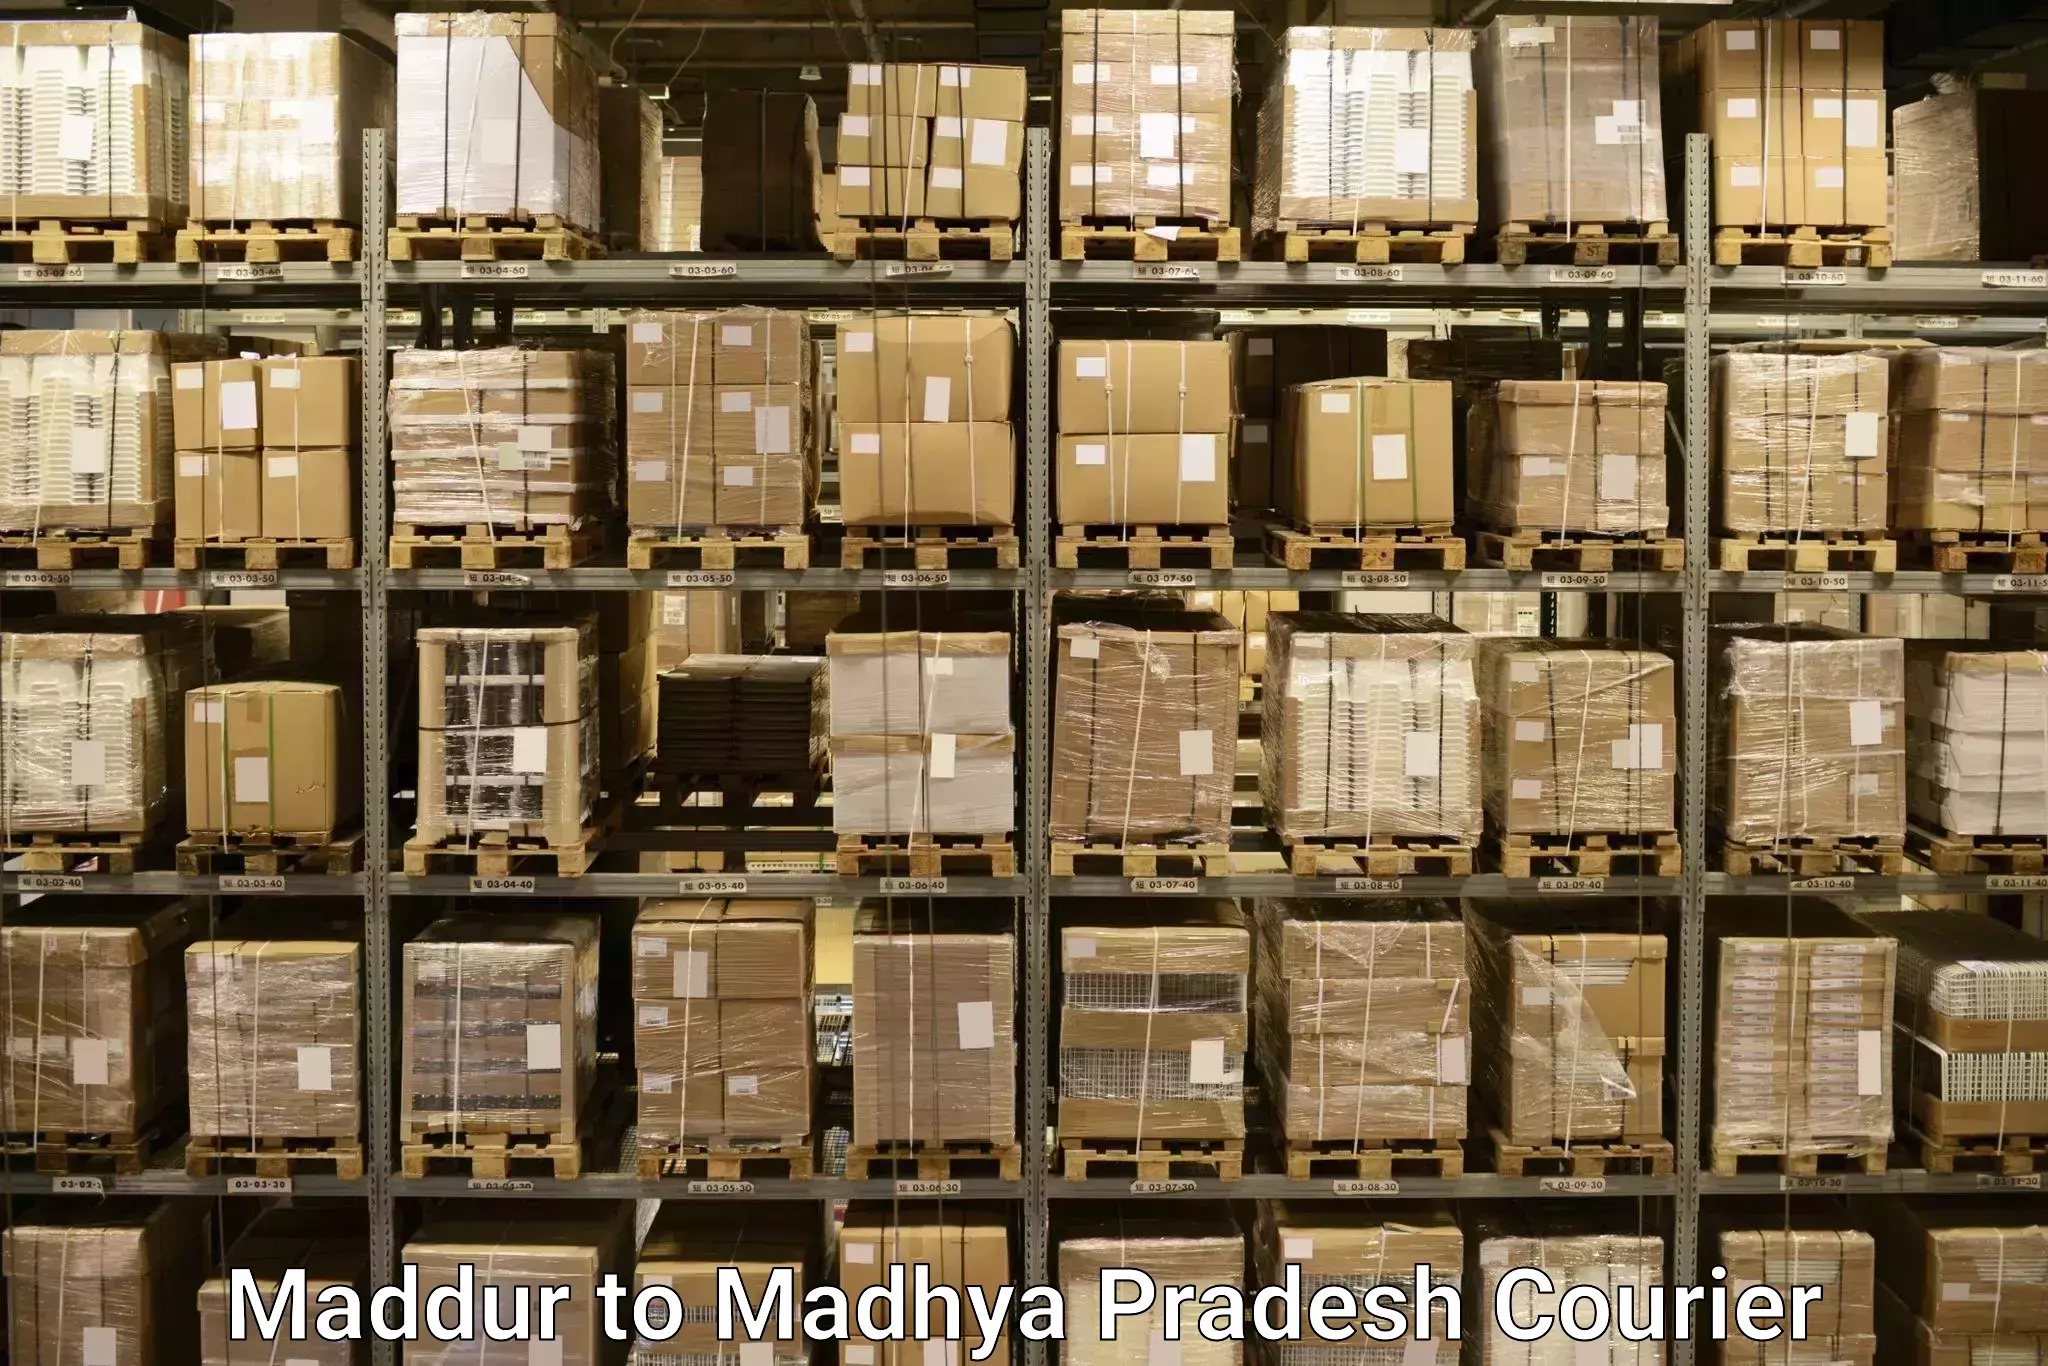 Personal effects shipping in Maddur to Seoni